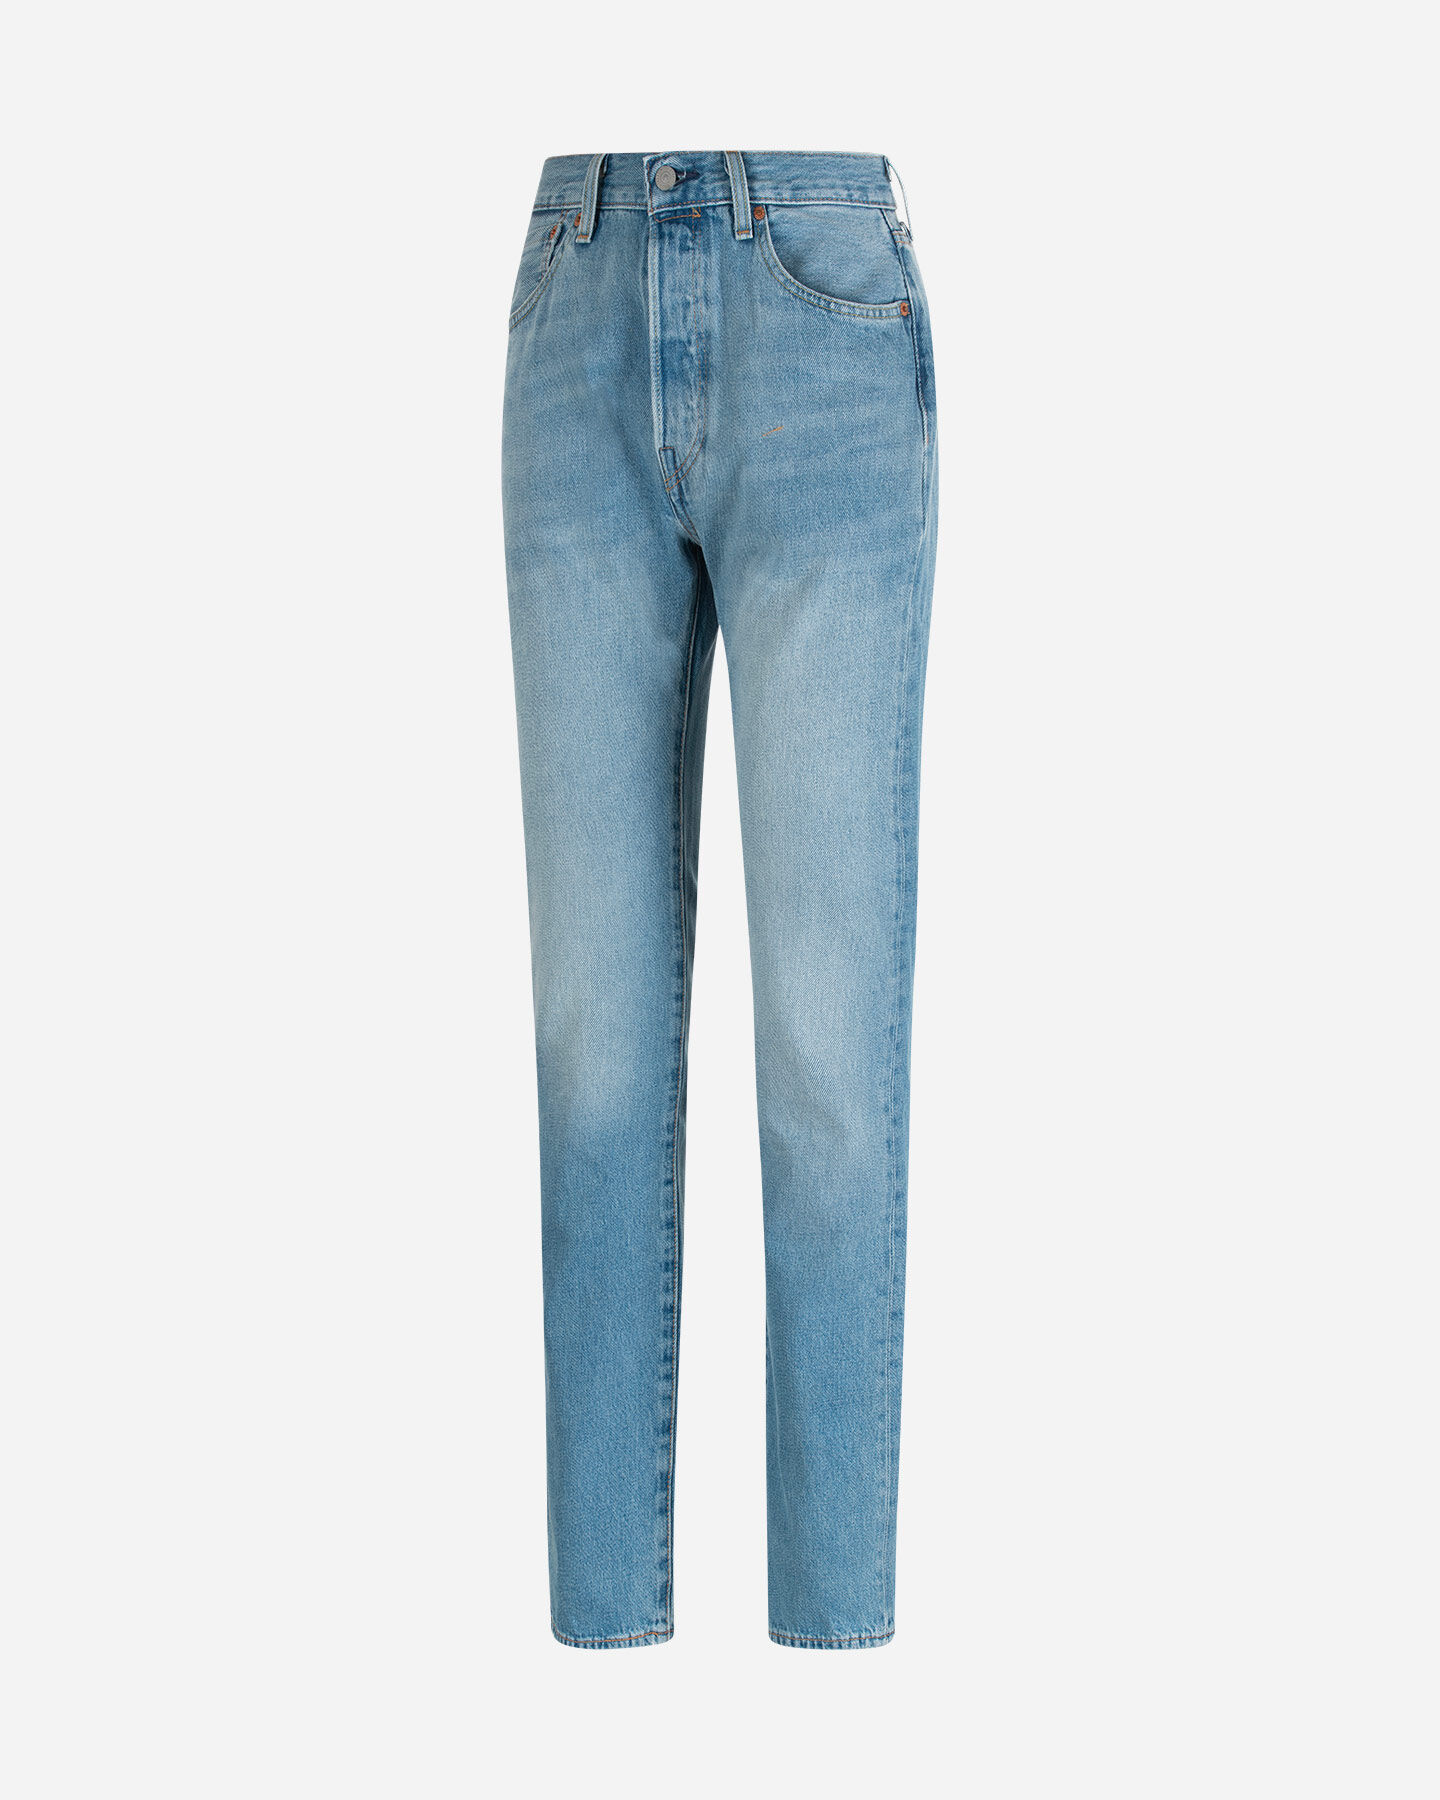  Jeans LEVI'S 501 REGULAR M S4122296|3261|33 scatto 0